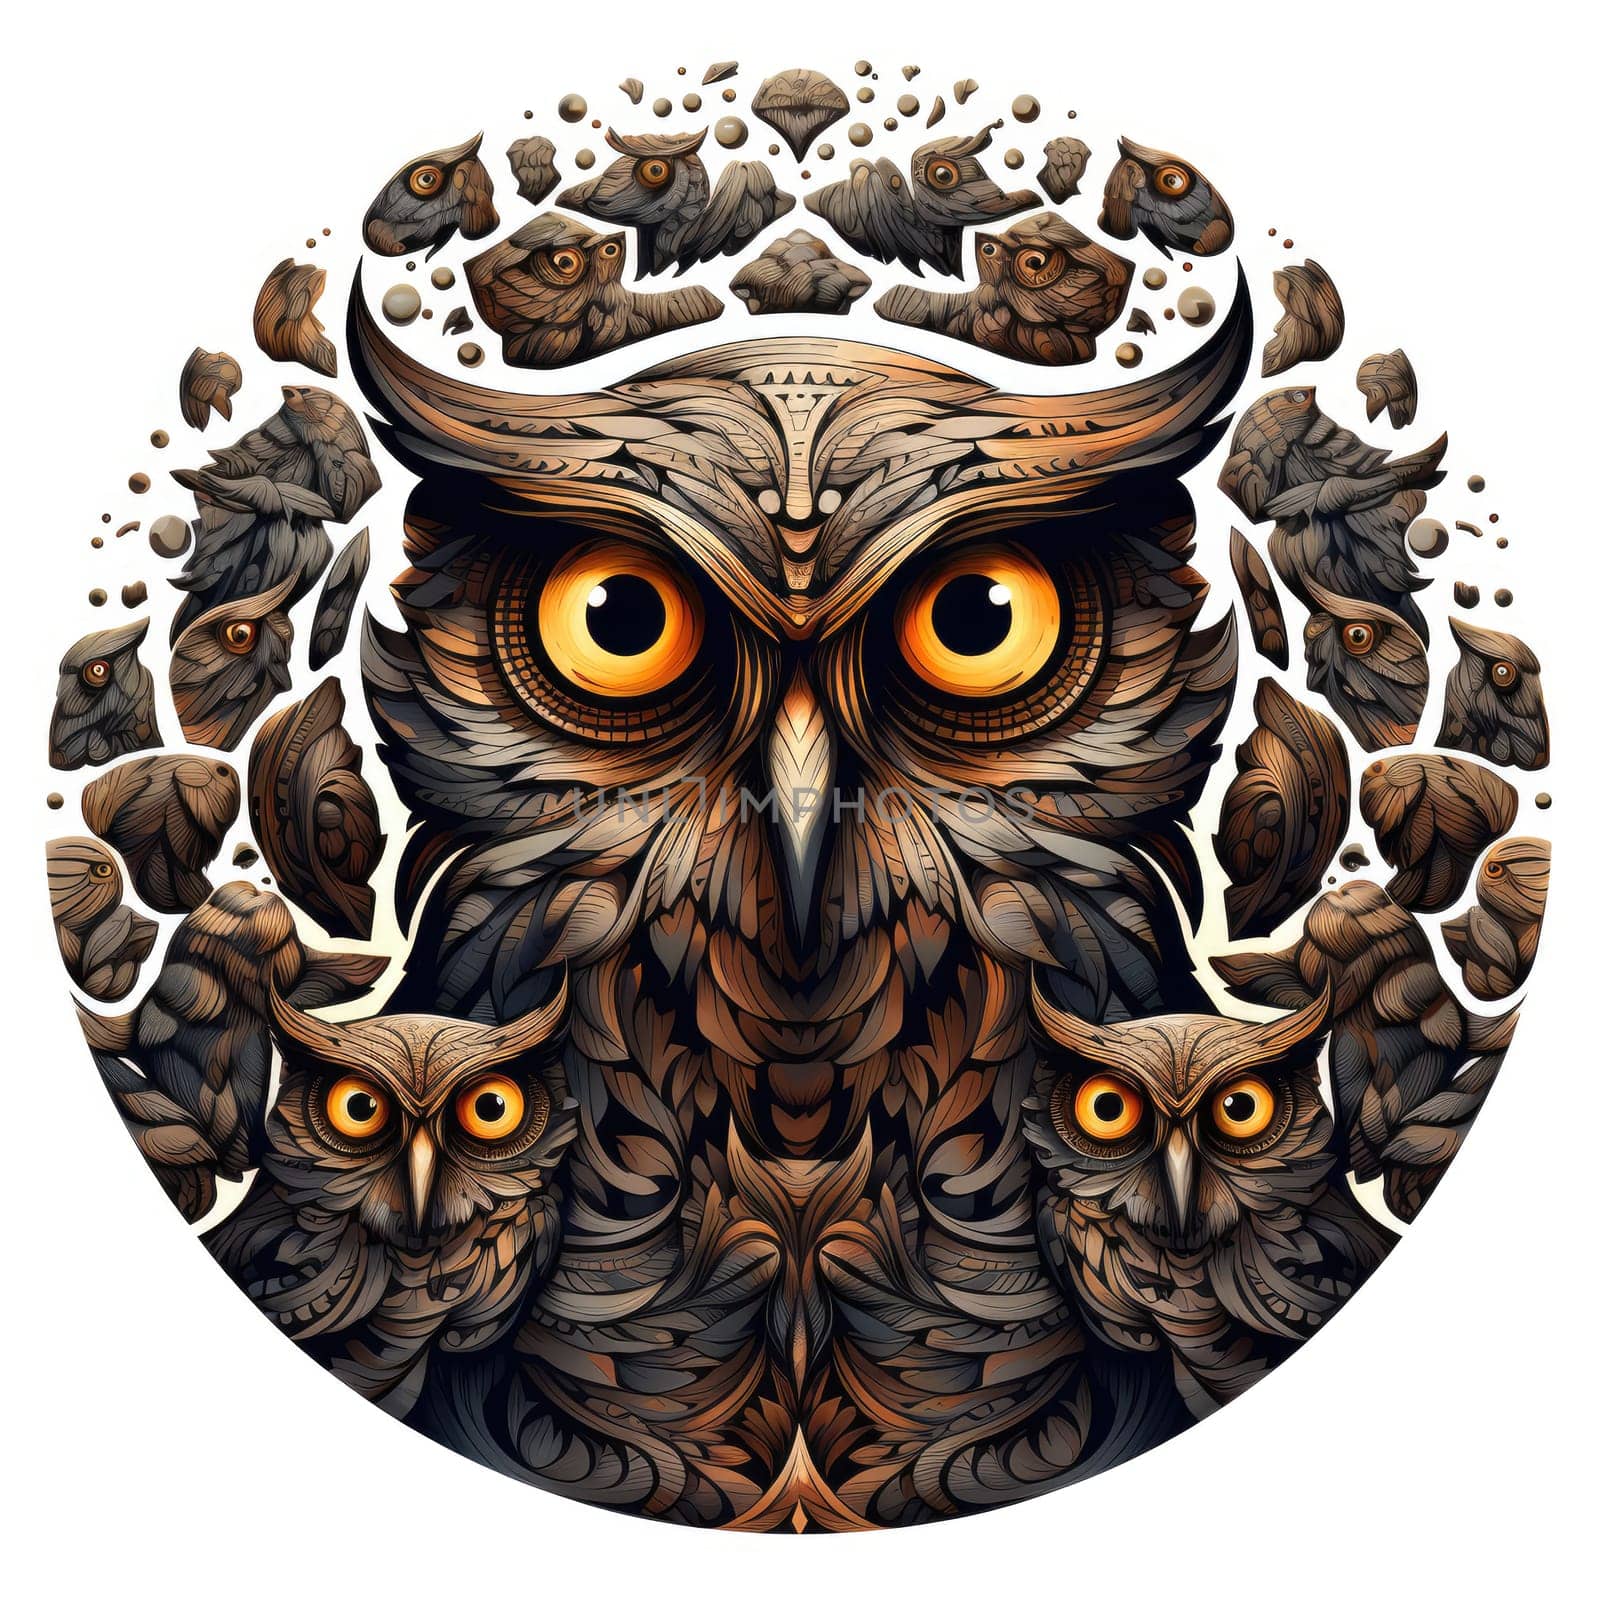 Illustration of an owl family in a decorative art style isolated on white. Template for sticker, t-shirt print, poster, etc.